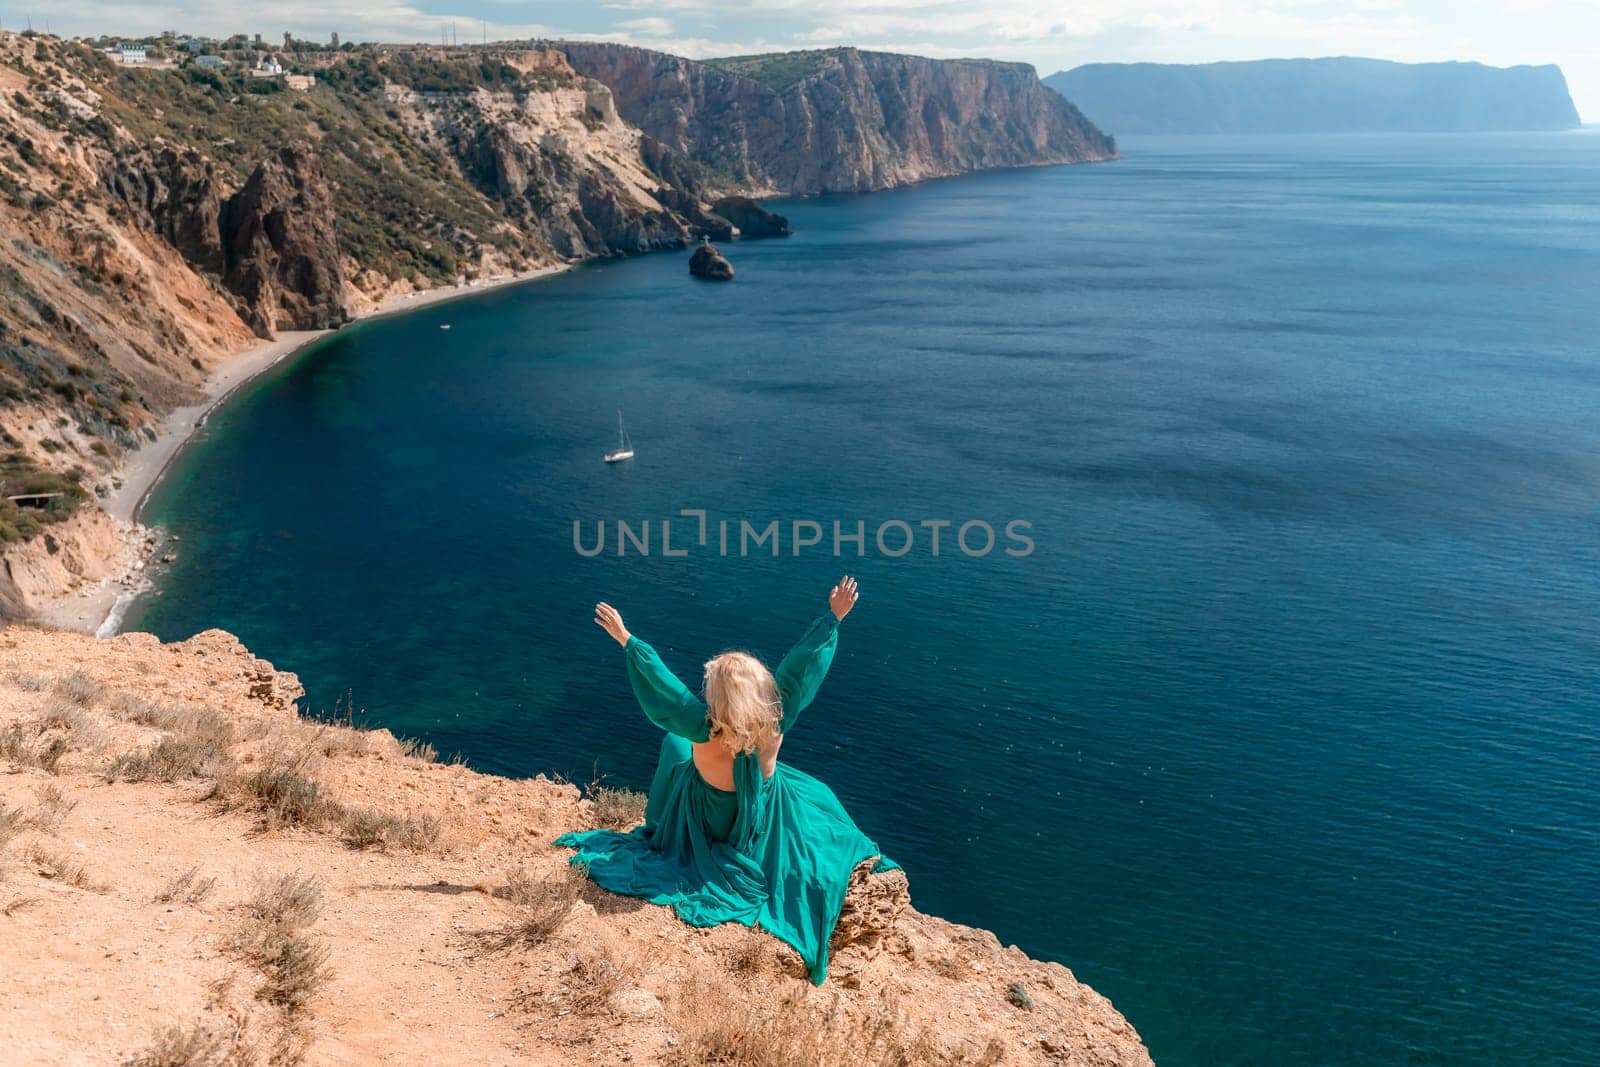 Woman sea. A happy girl is sitting with her back to the viewer in a mint dress on top of a mountain against the background of the ocean and rocks in the sea